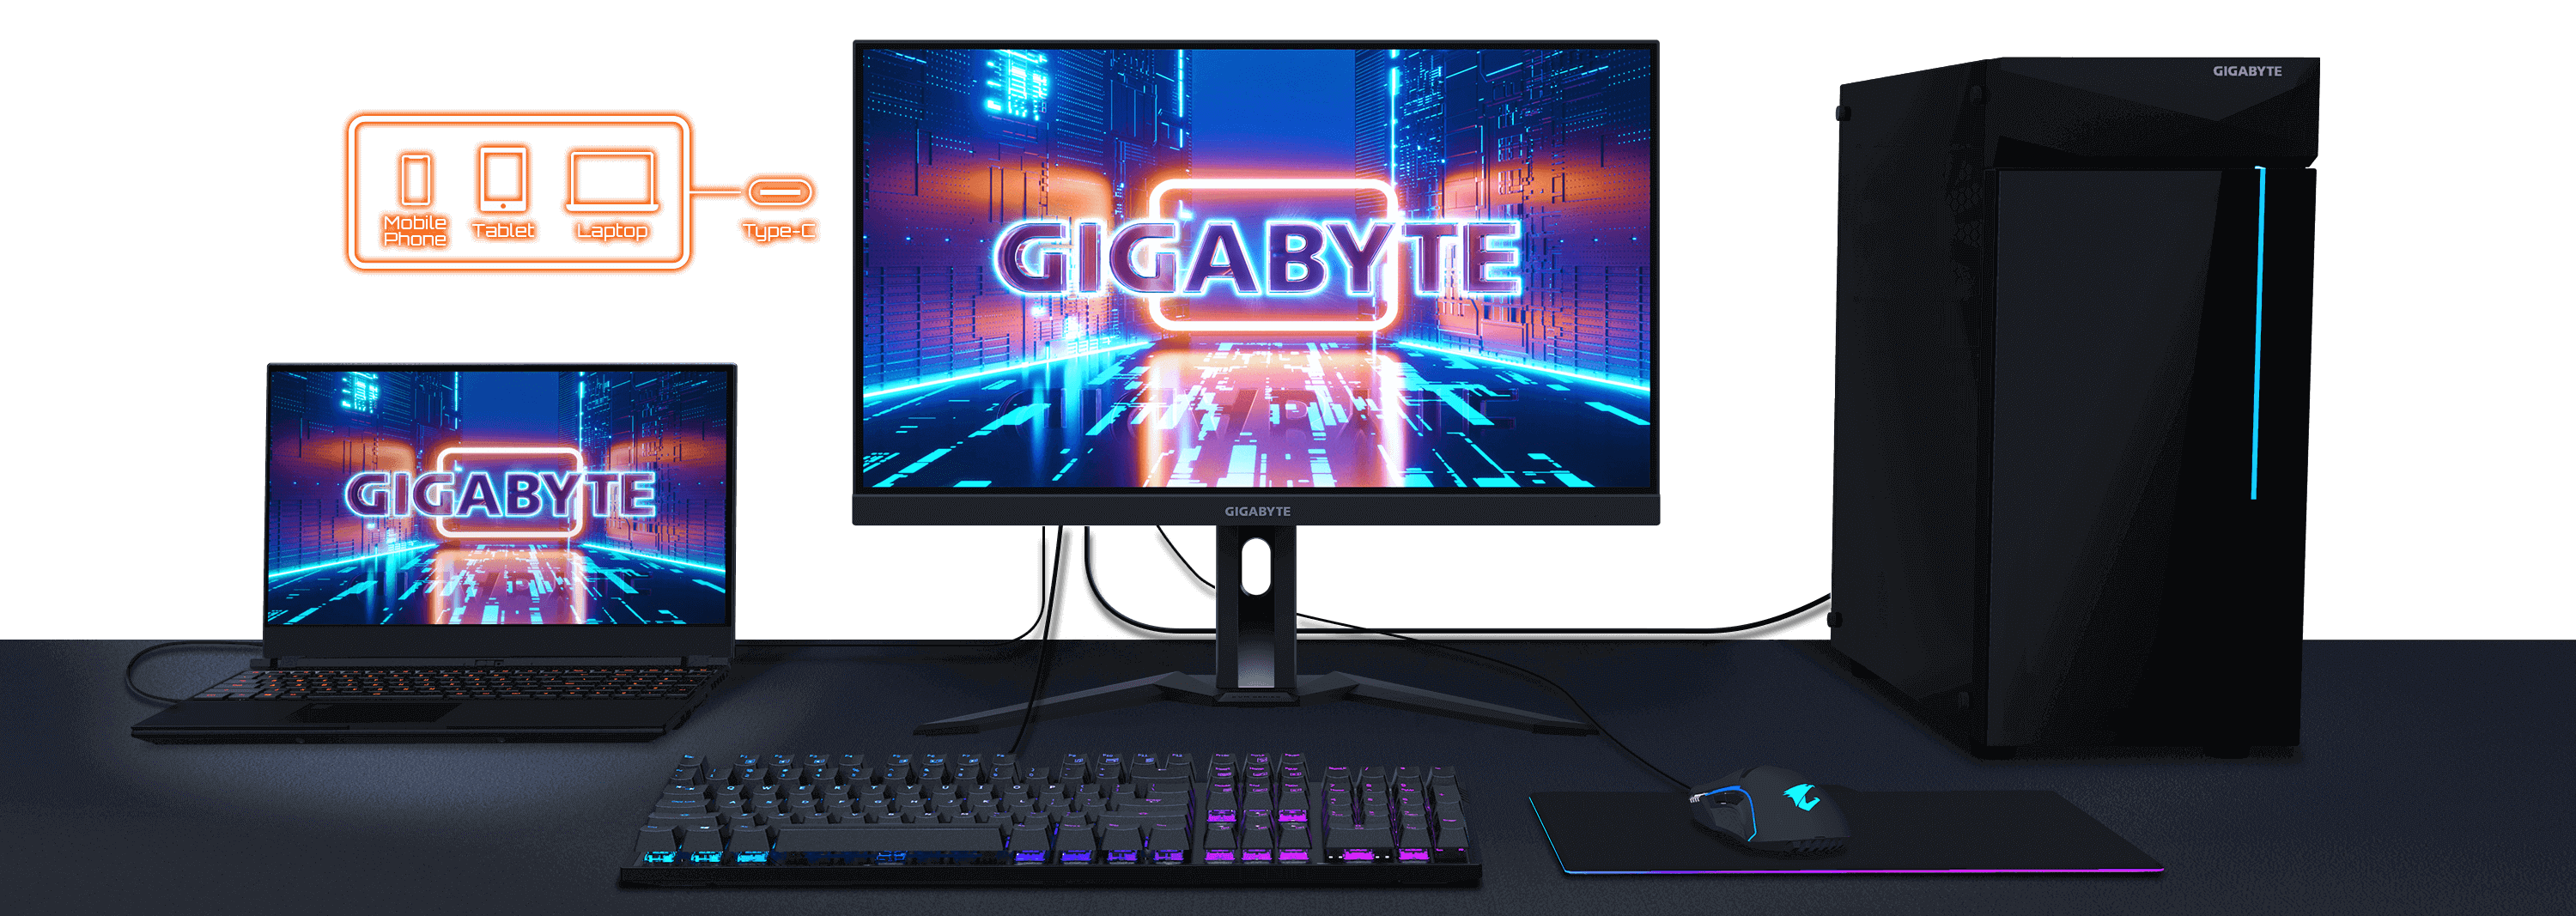 M27Q P Gaming Monitor Key Features | Monitor - GIGABYTE Global